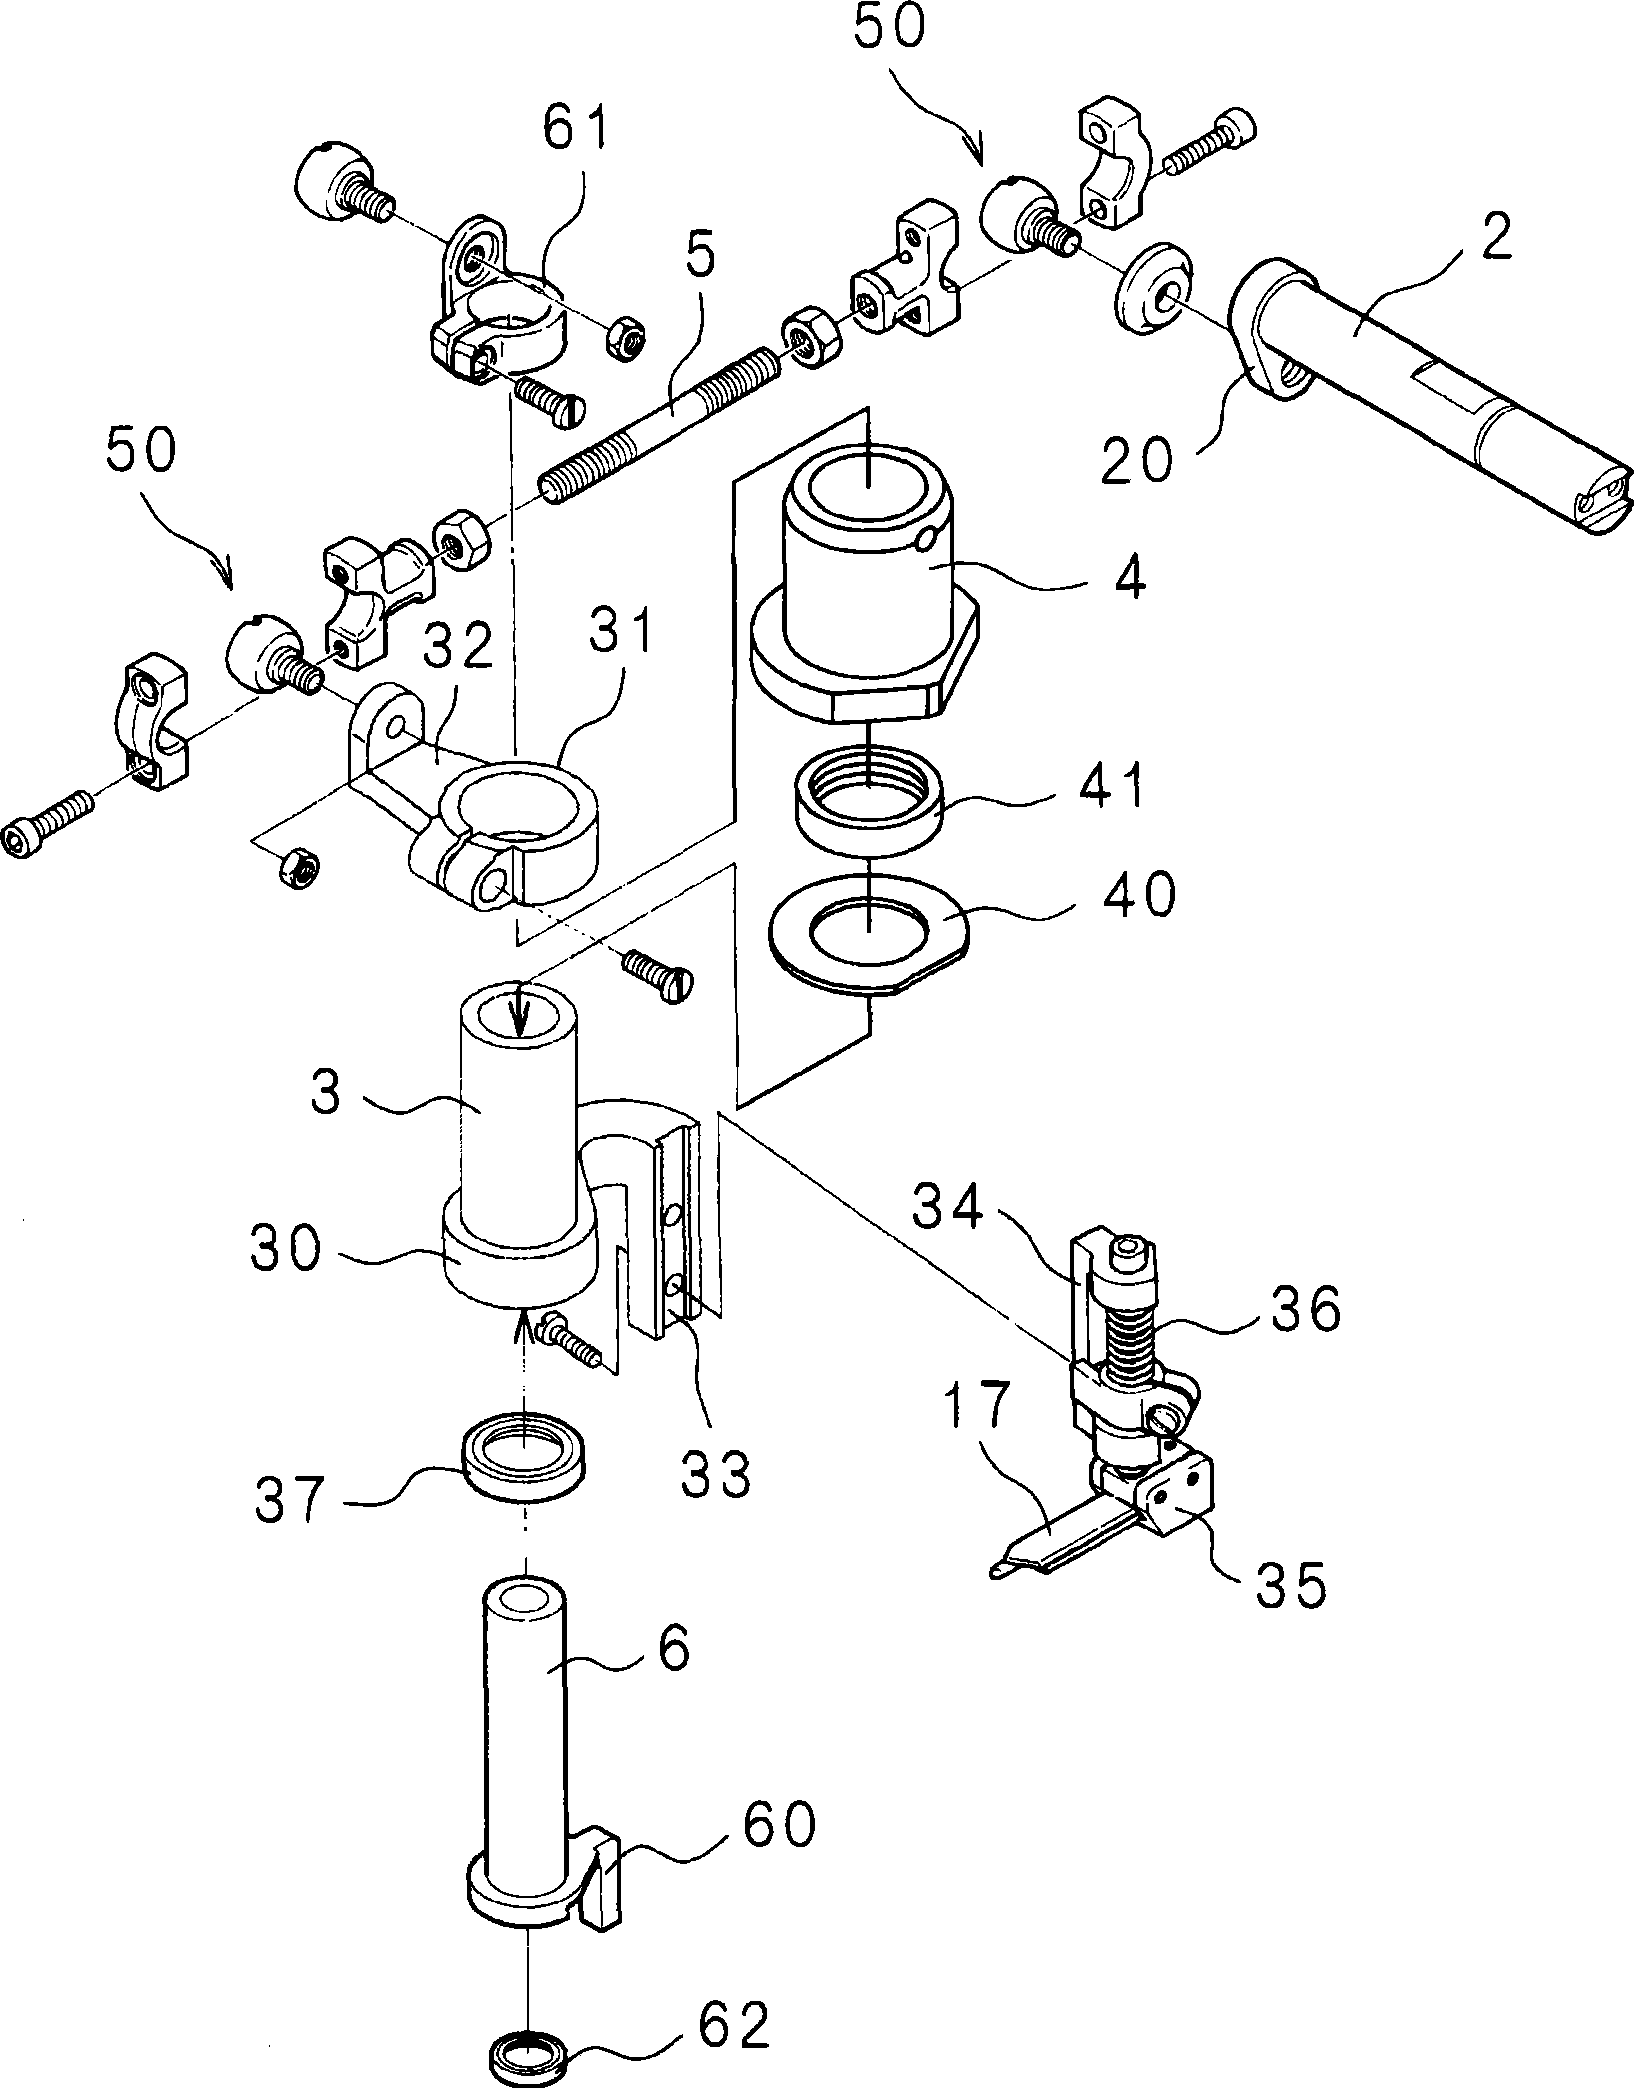 Driving device for cutter of sewing machine